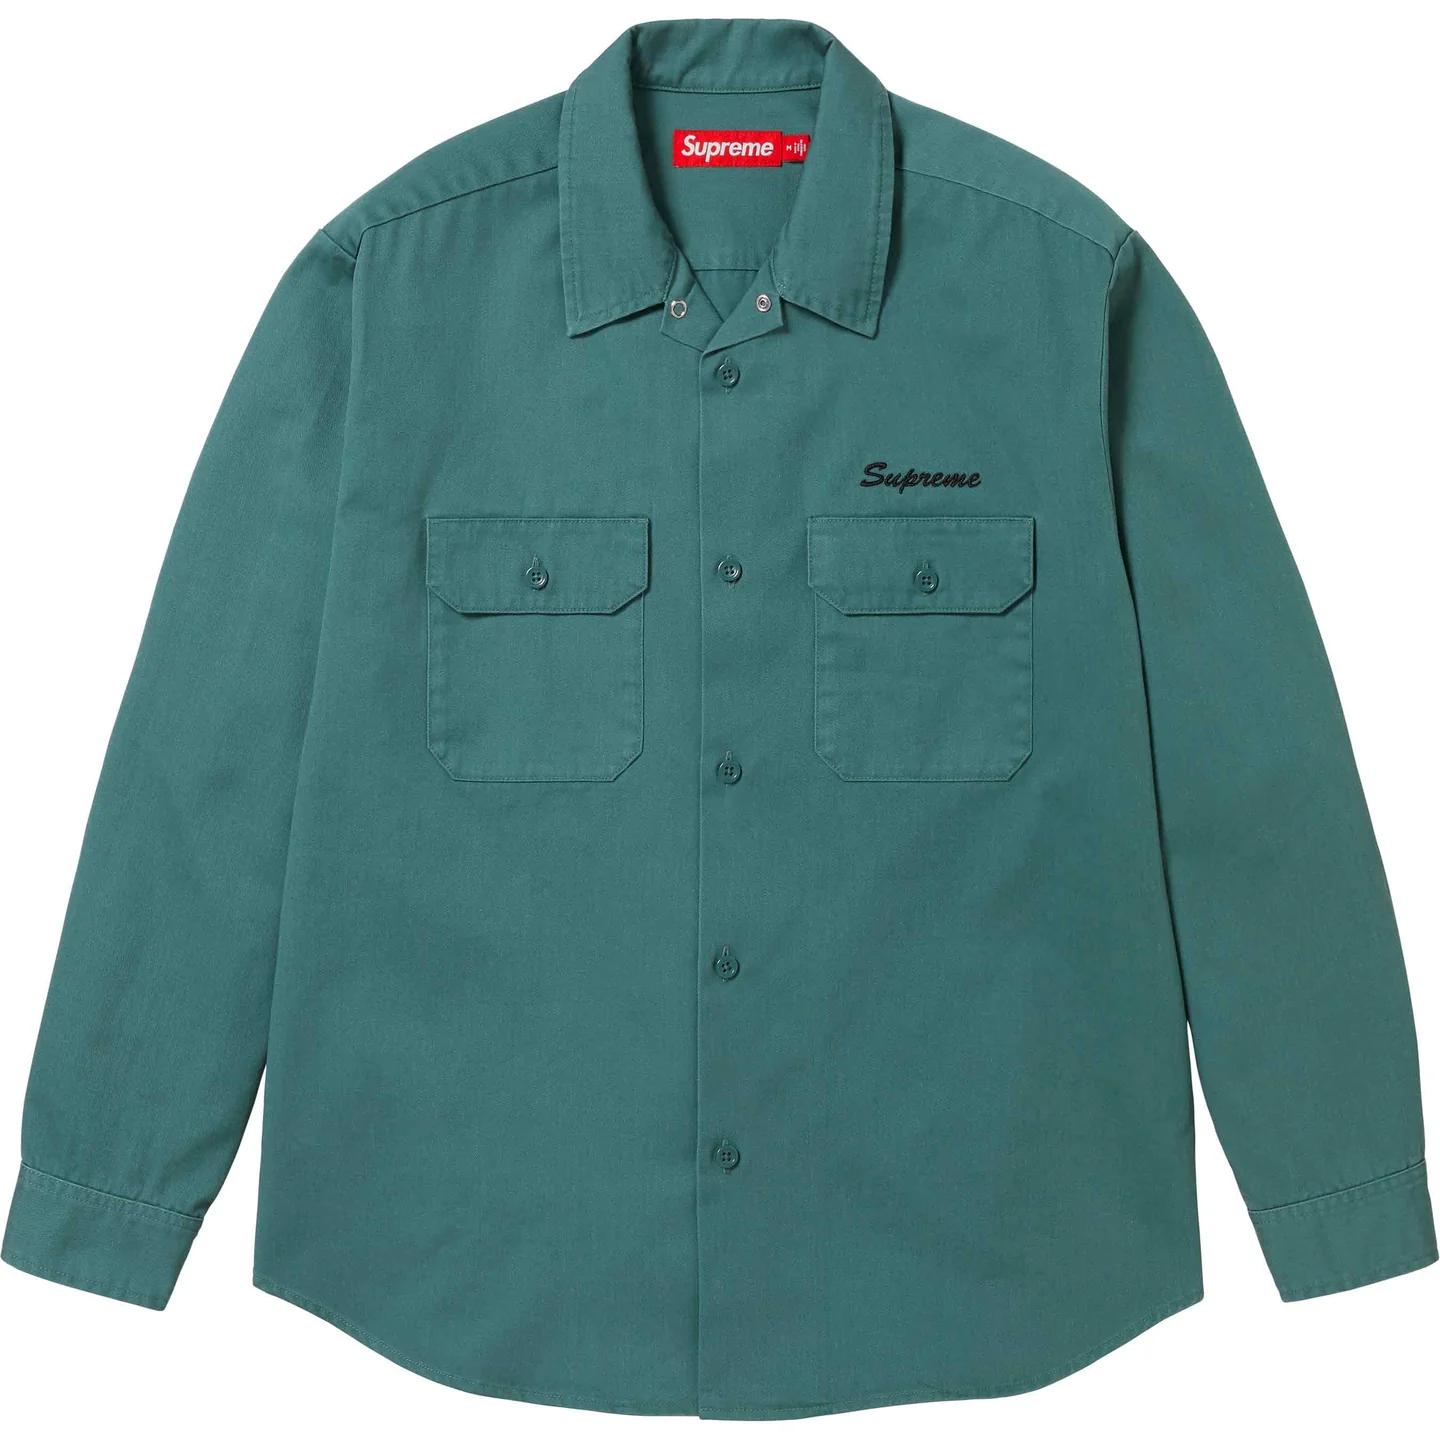 Our Lady Work Shirt | Supreme 24ss